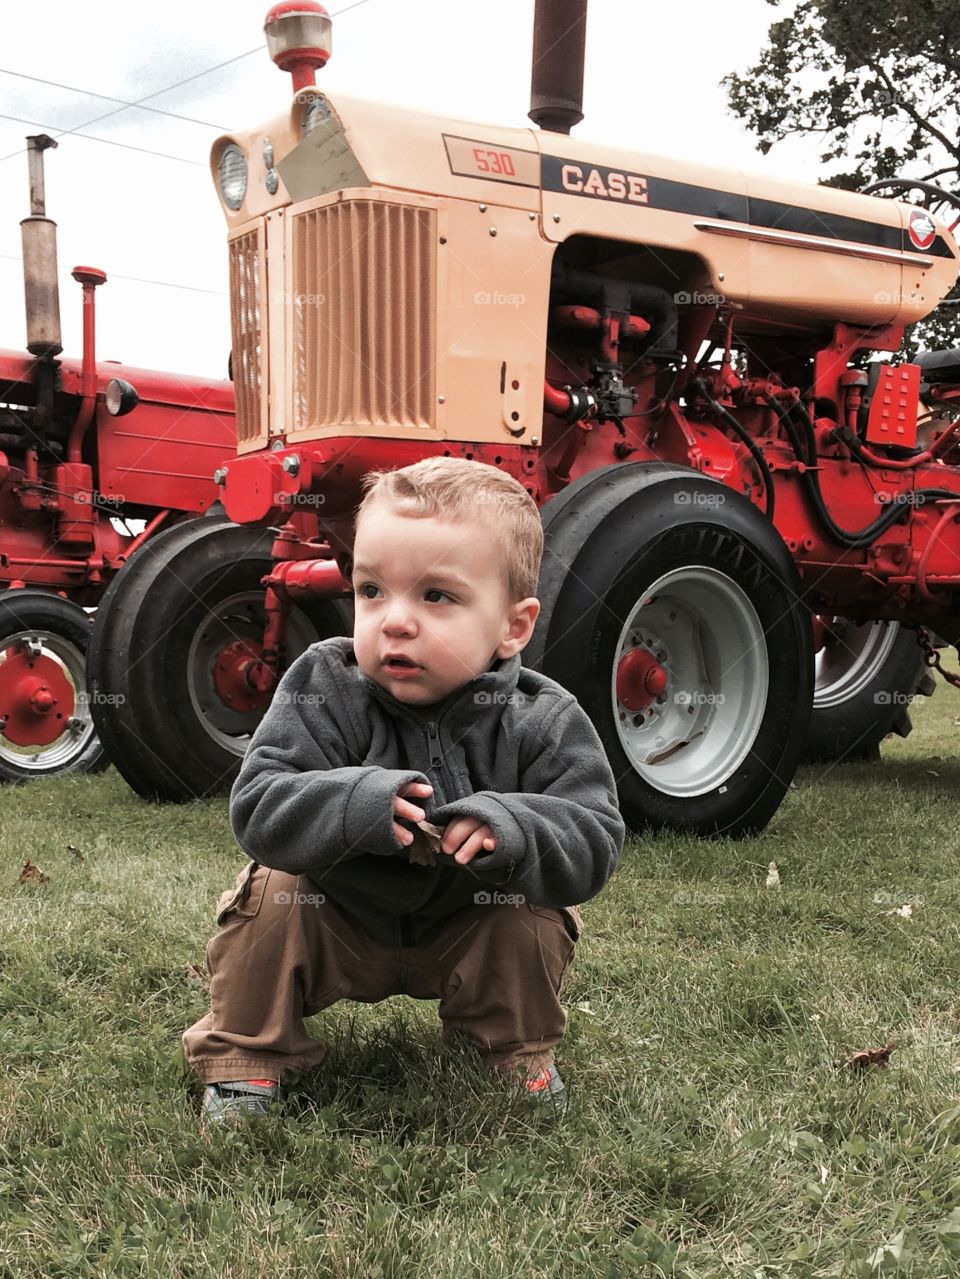 Real boys like Case. Tractor show at church. My son loves tractors.